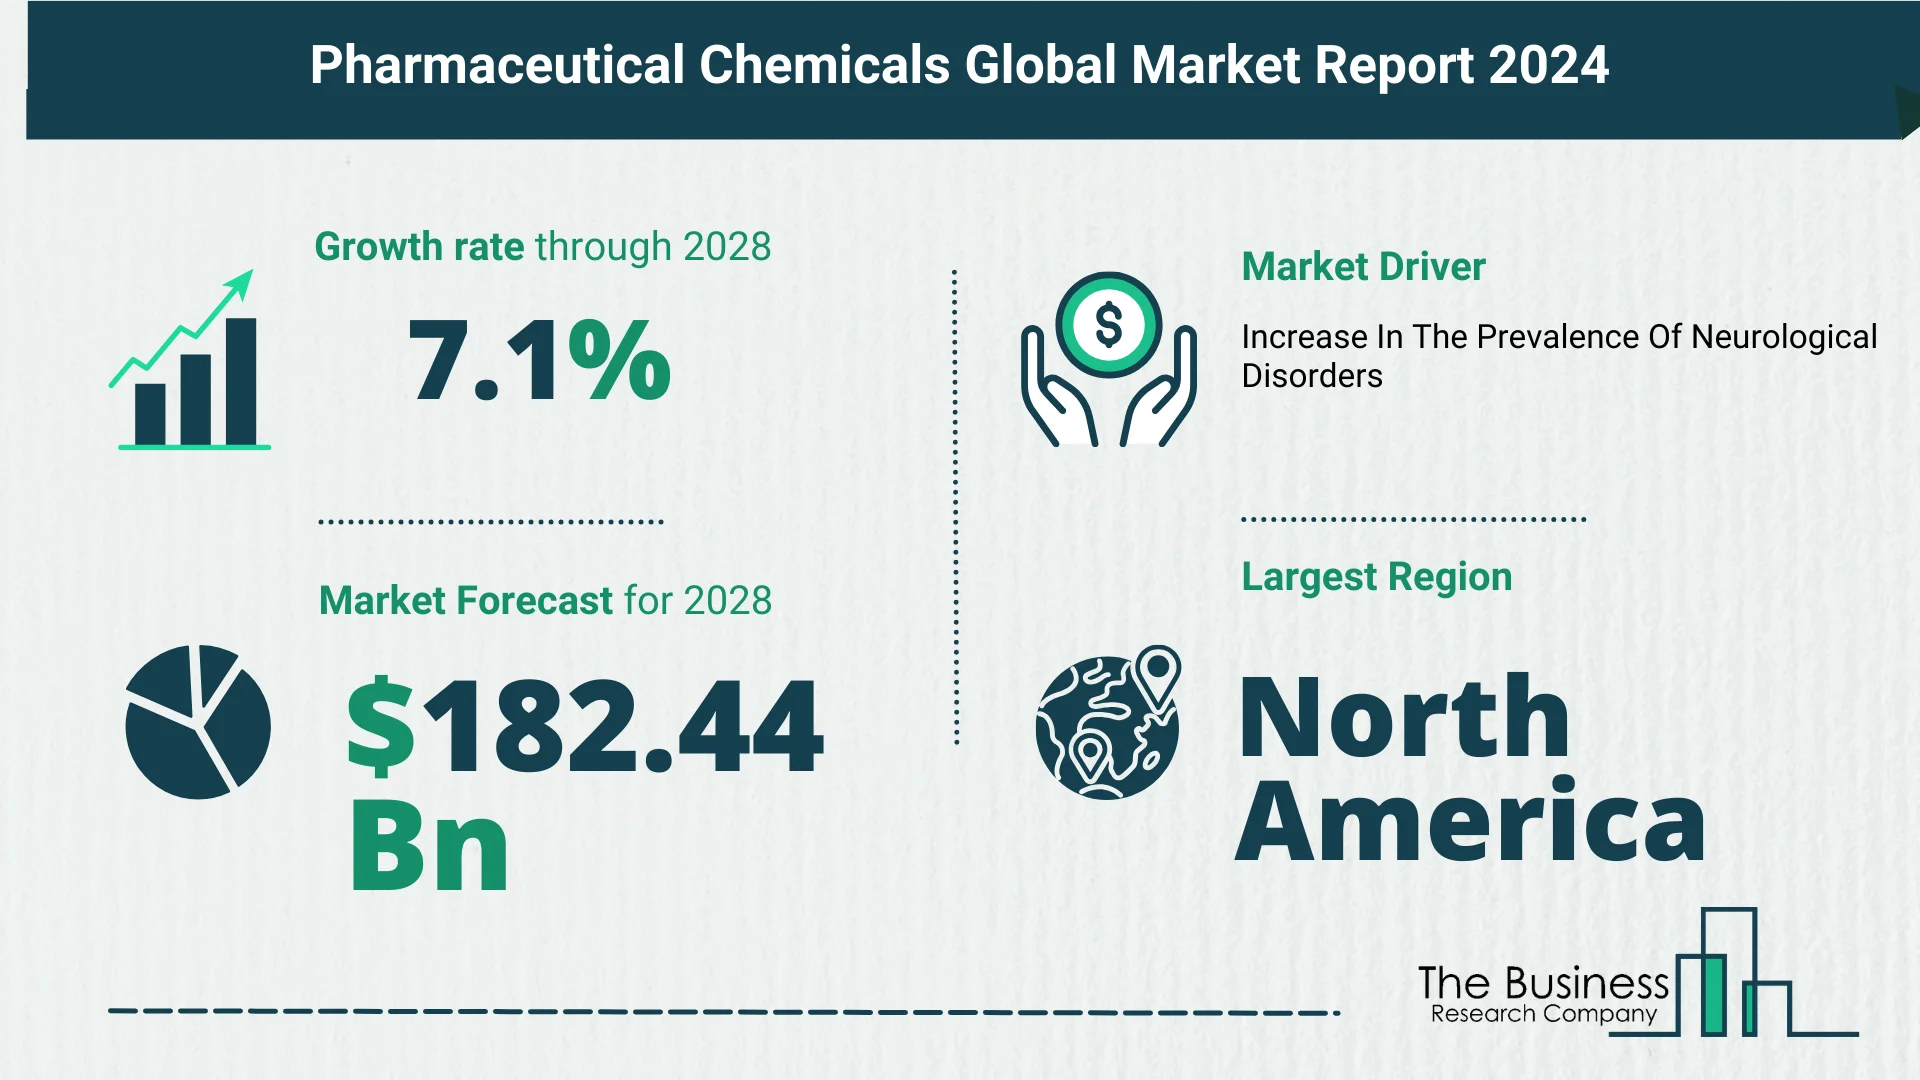 How Is The Pharmaceutical Chemicals Market Expected To Grow Through 2024-2033